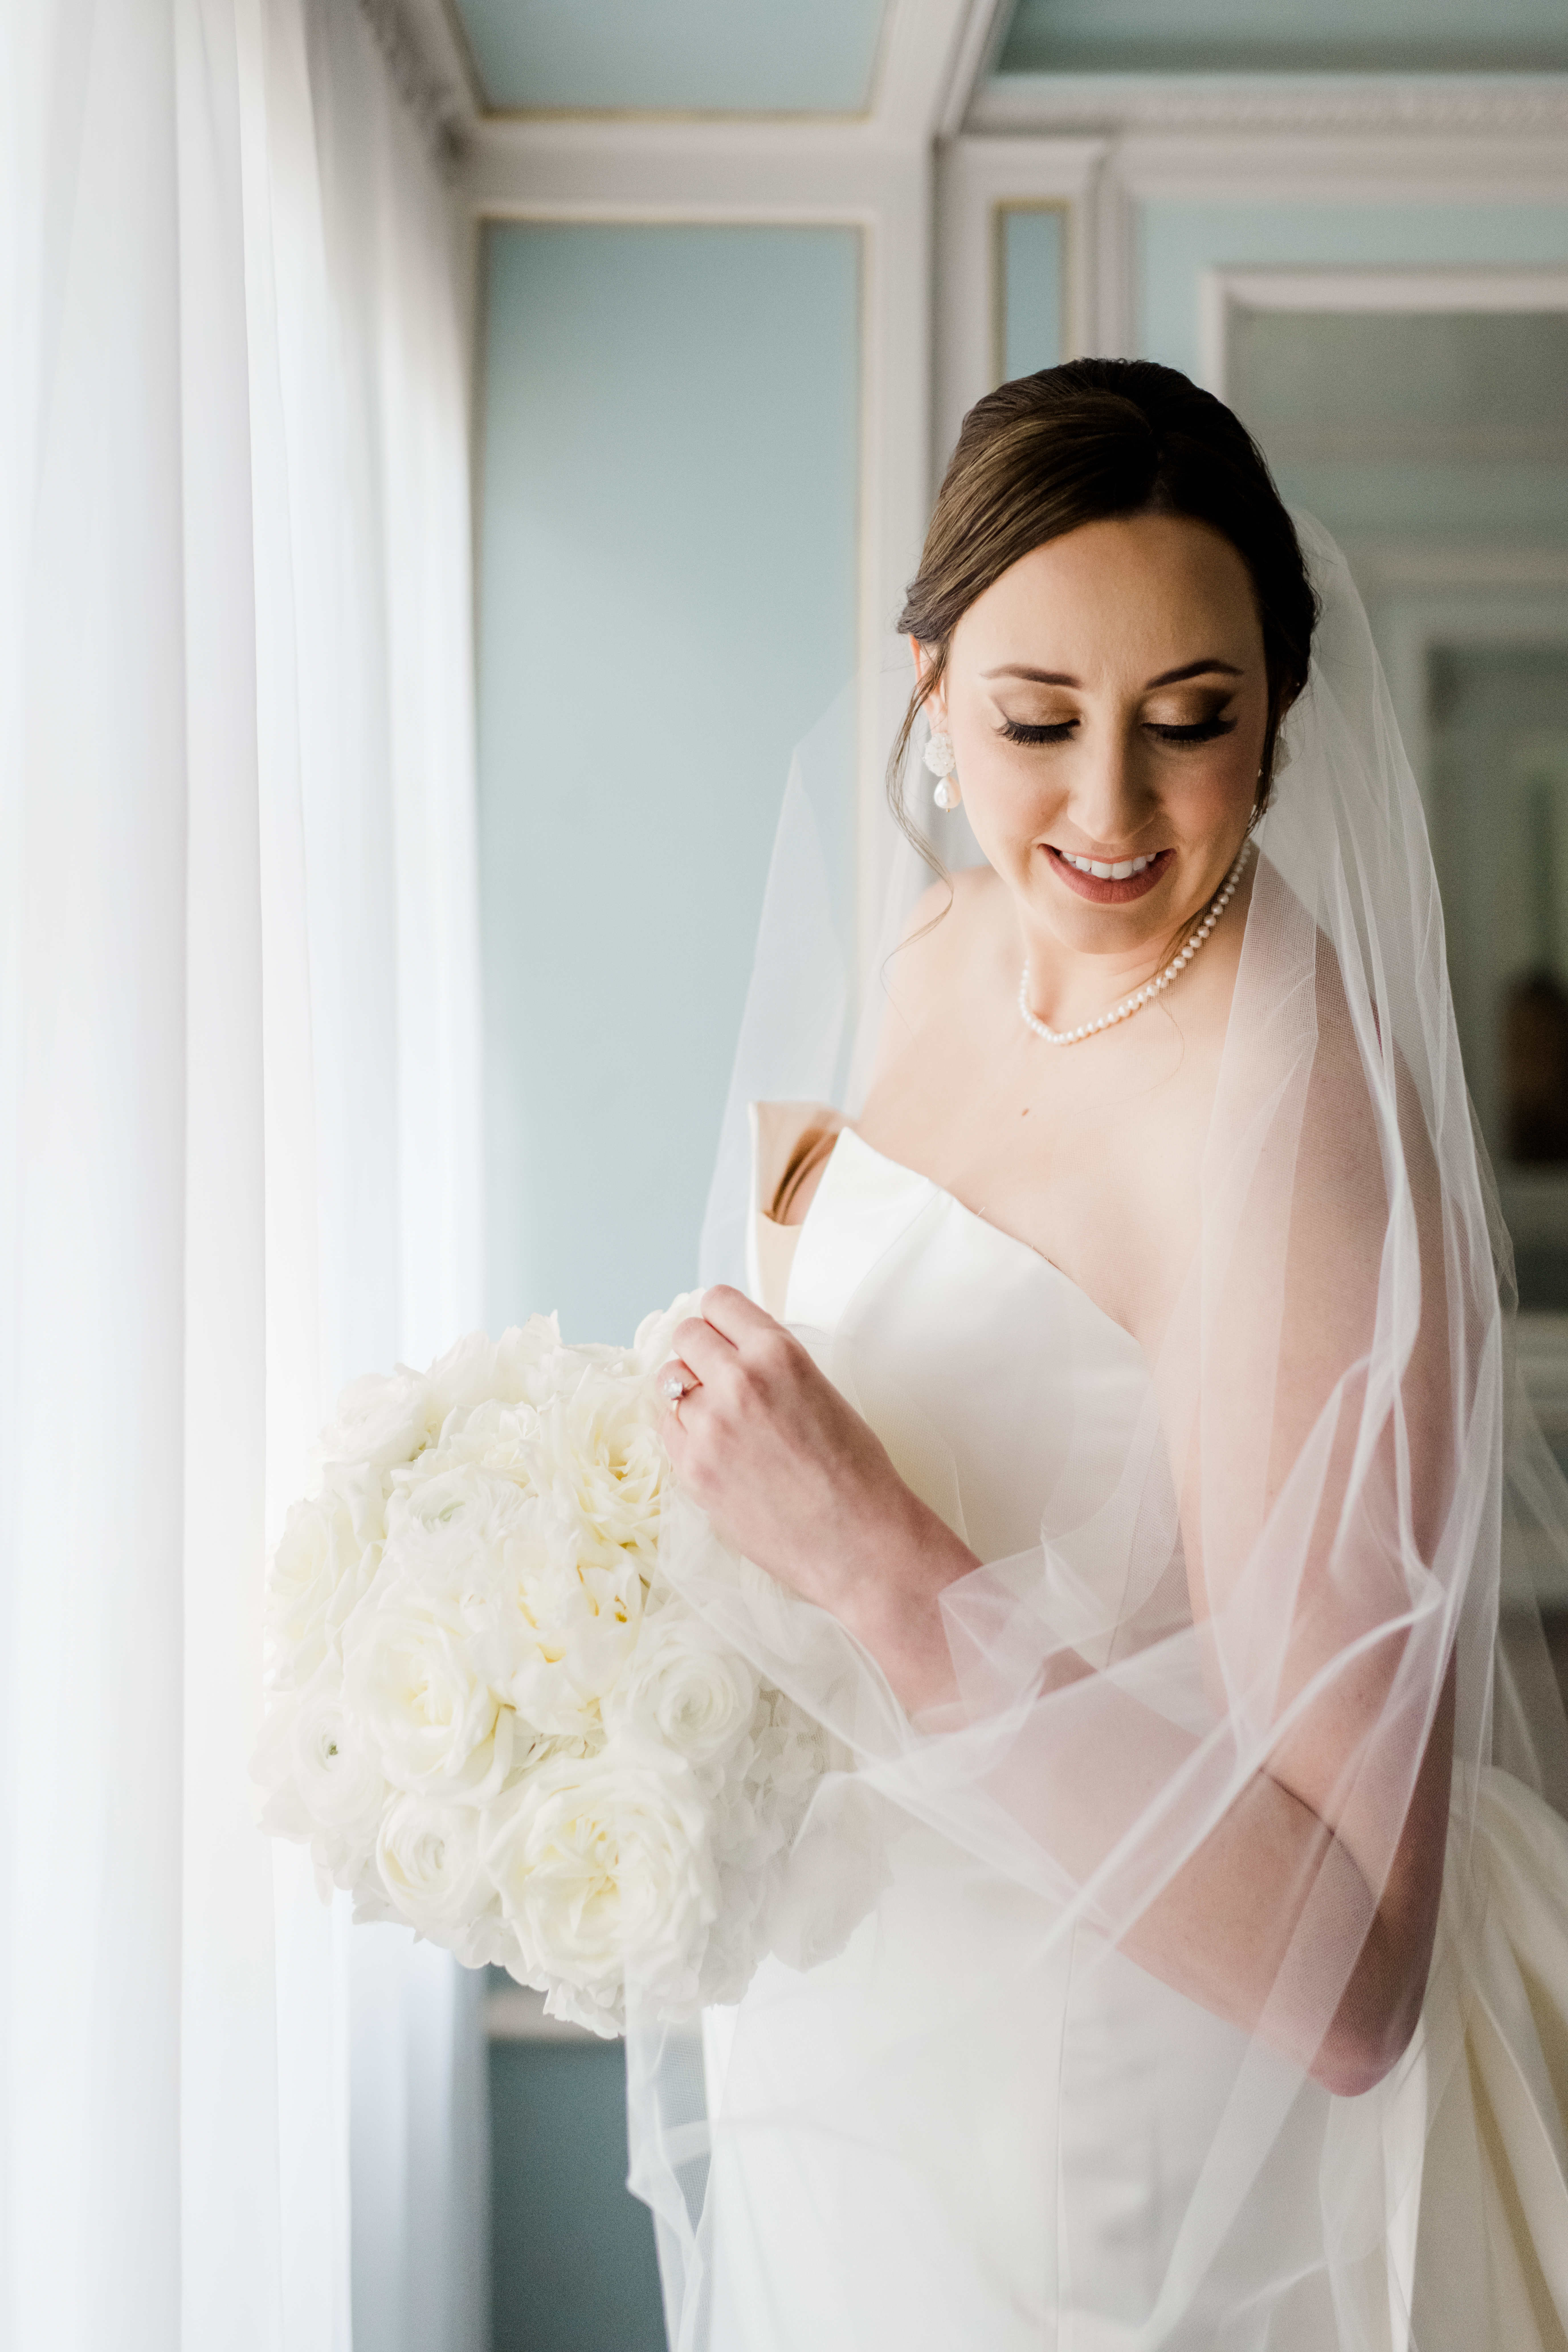 Lindy's Astin Mansion Bridal Session in Bryan, Texas with Rachel Driskell Photography